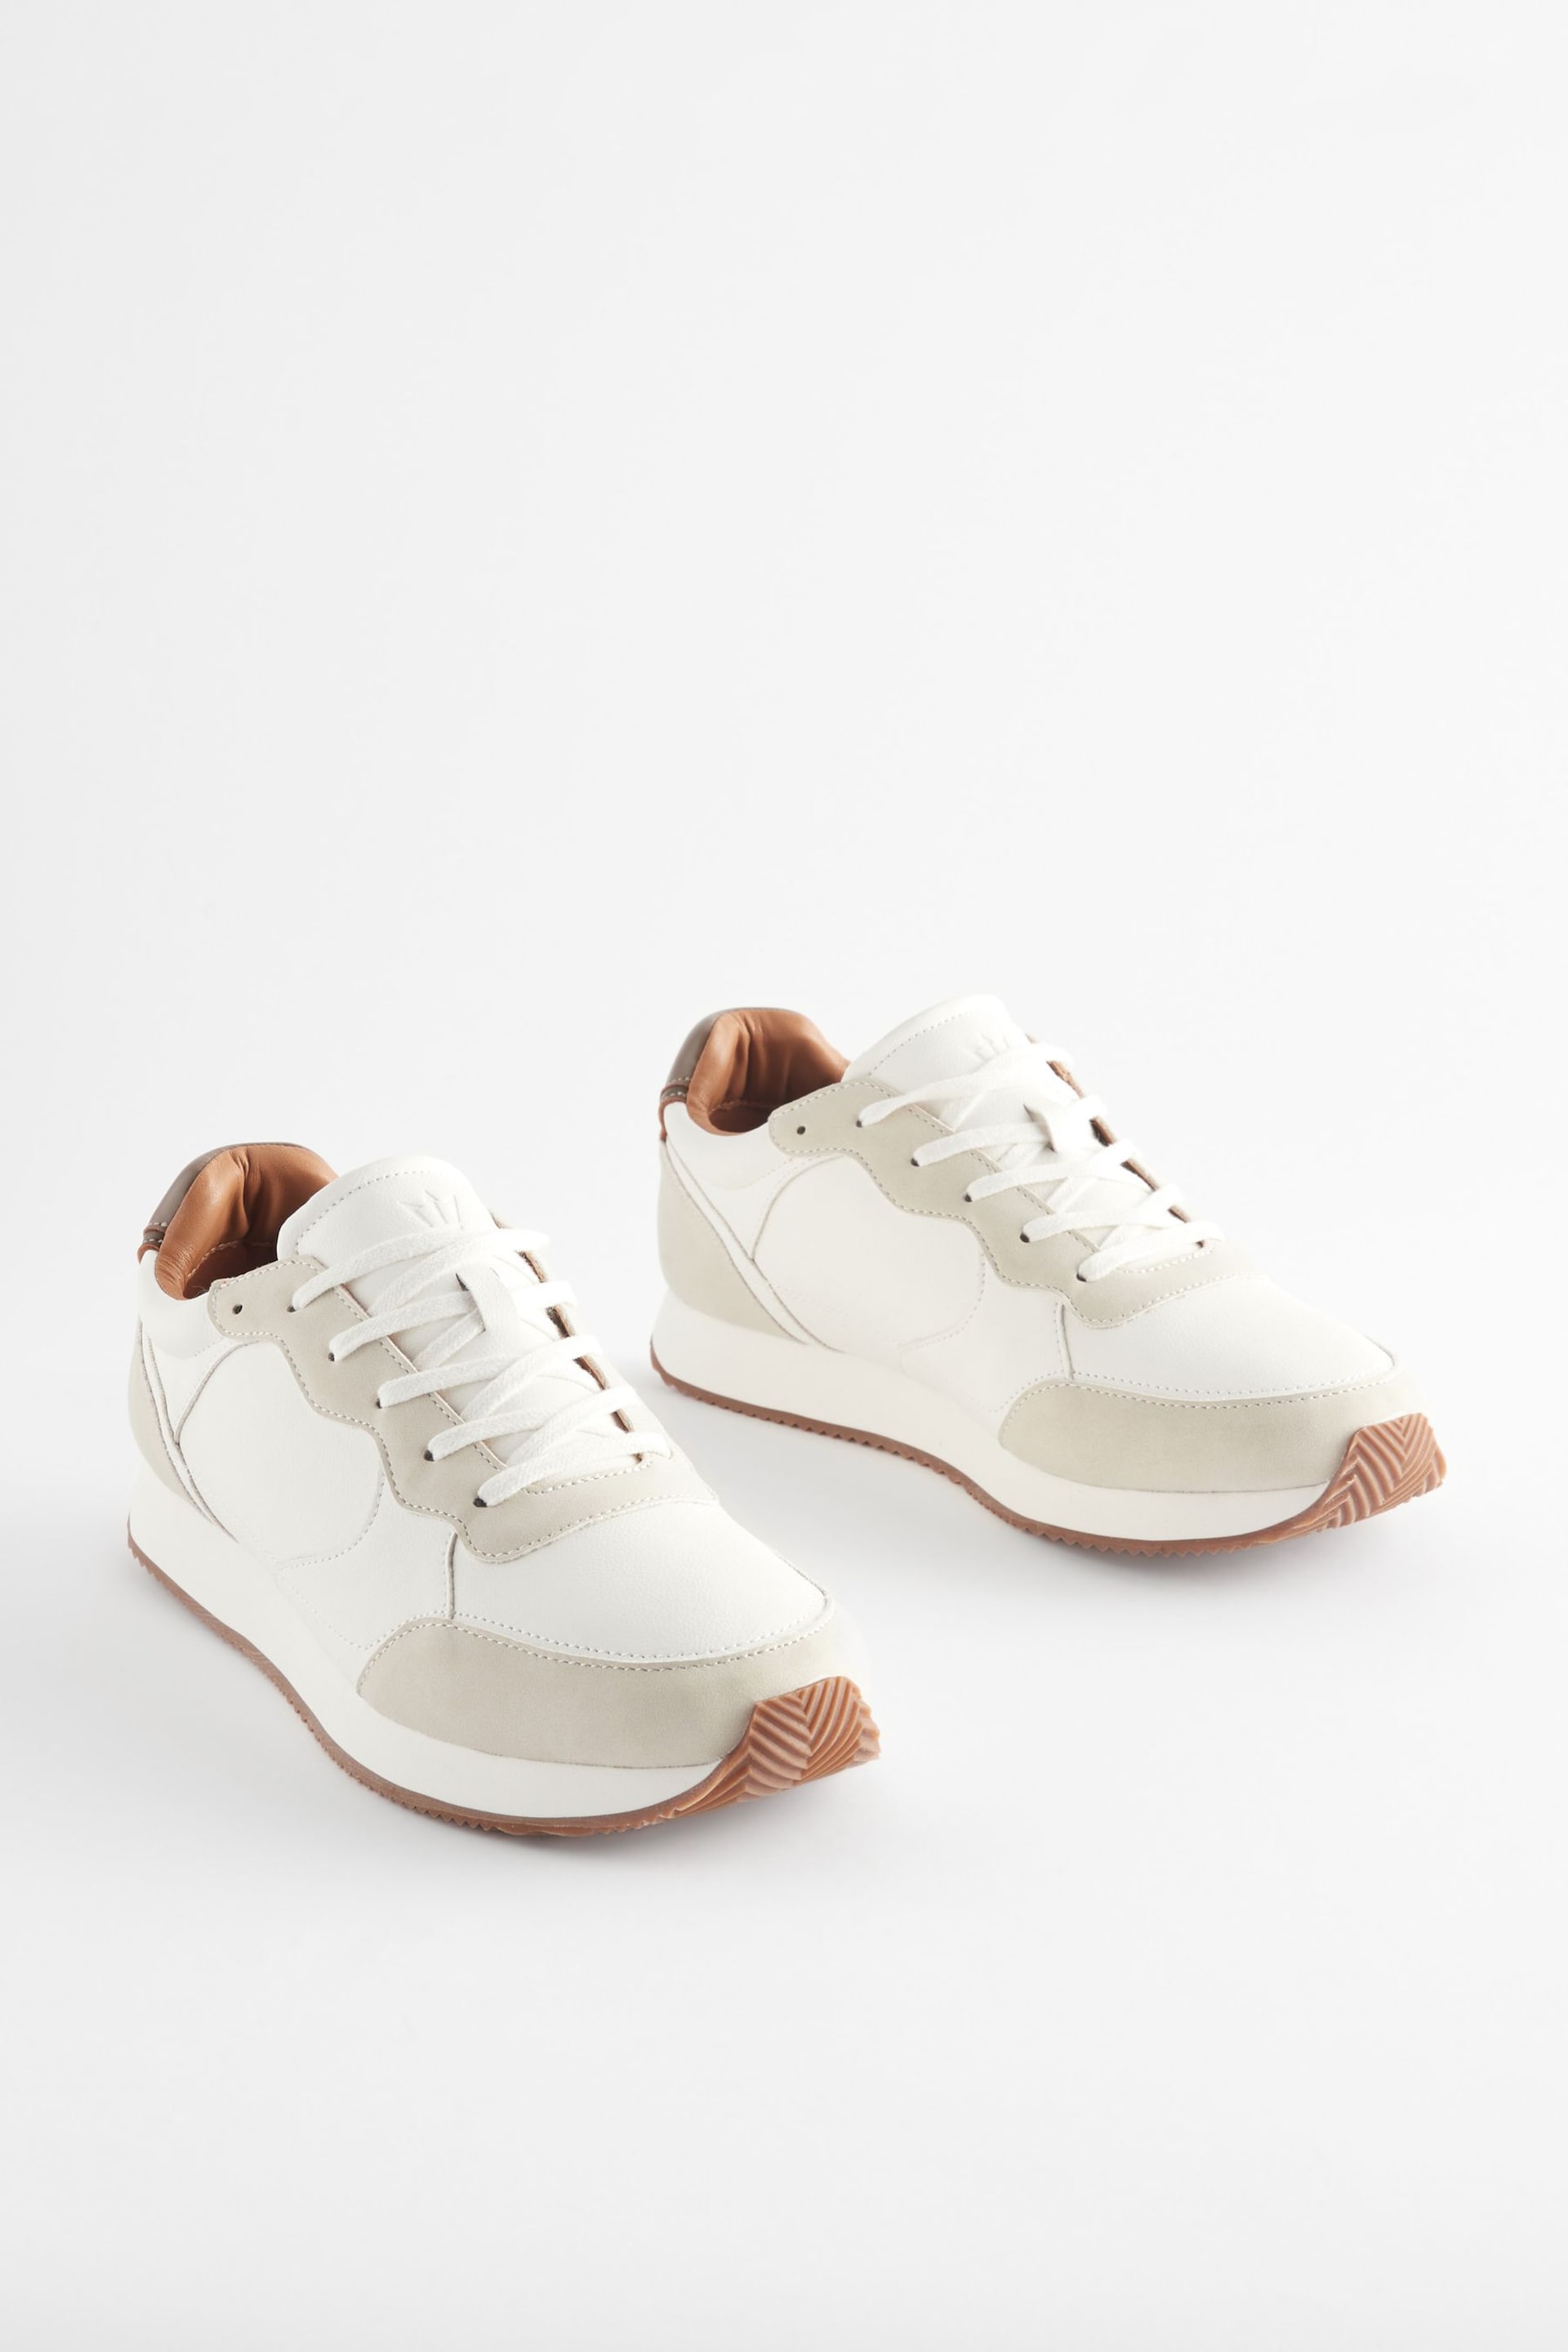 White Trainers - Image 1 of 5